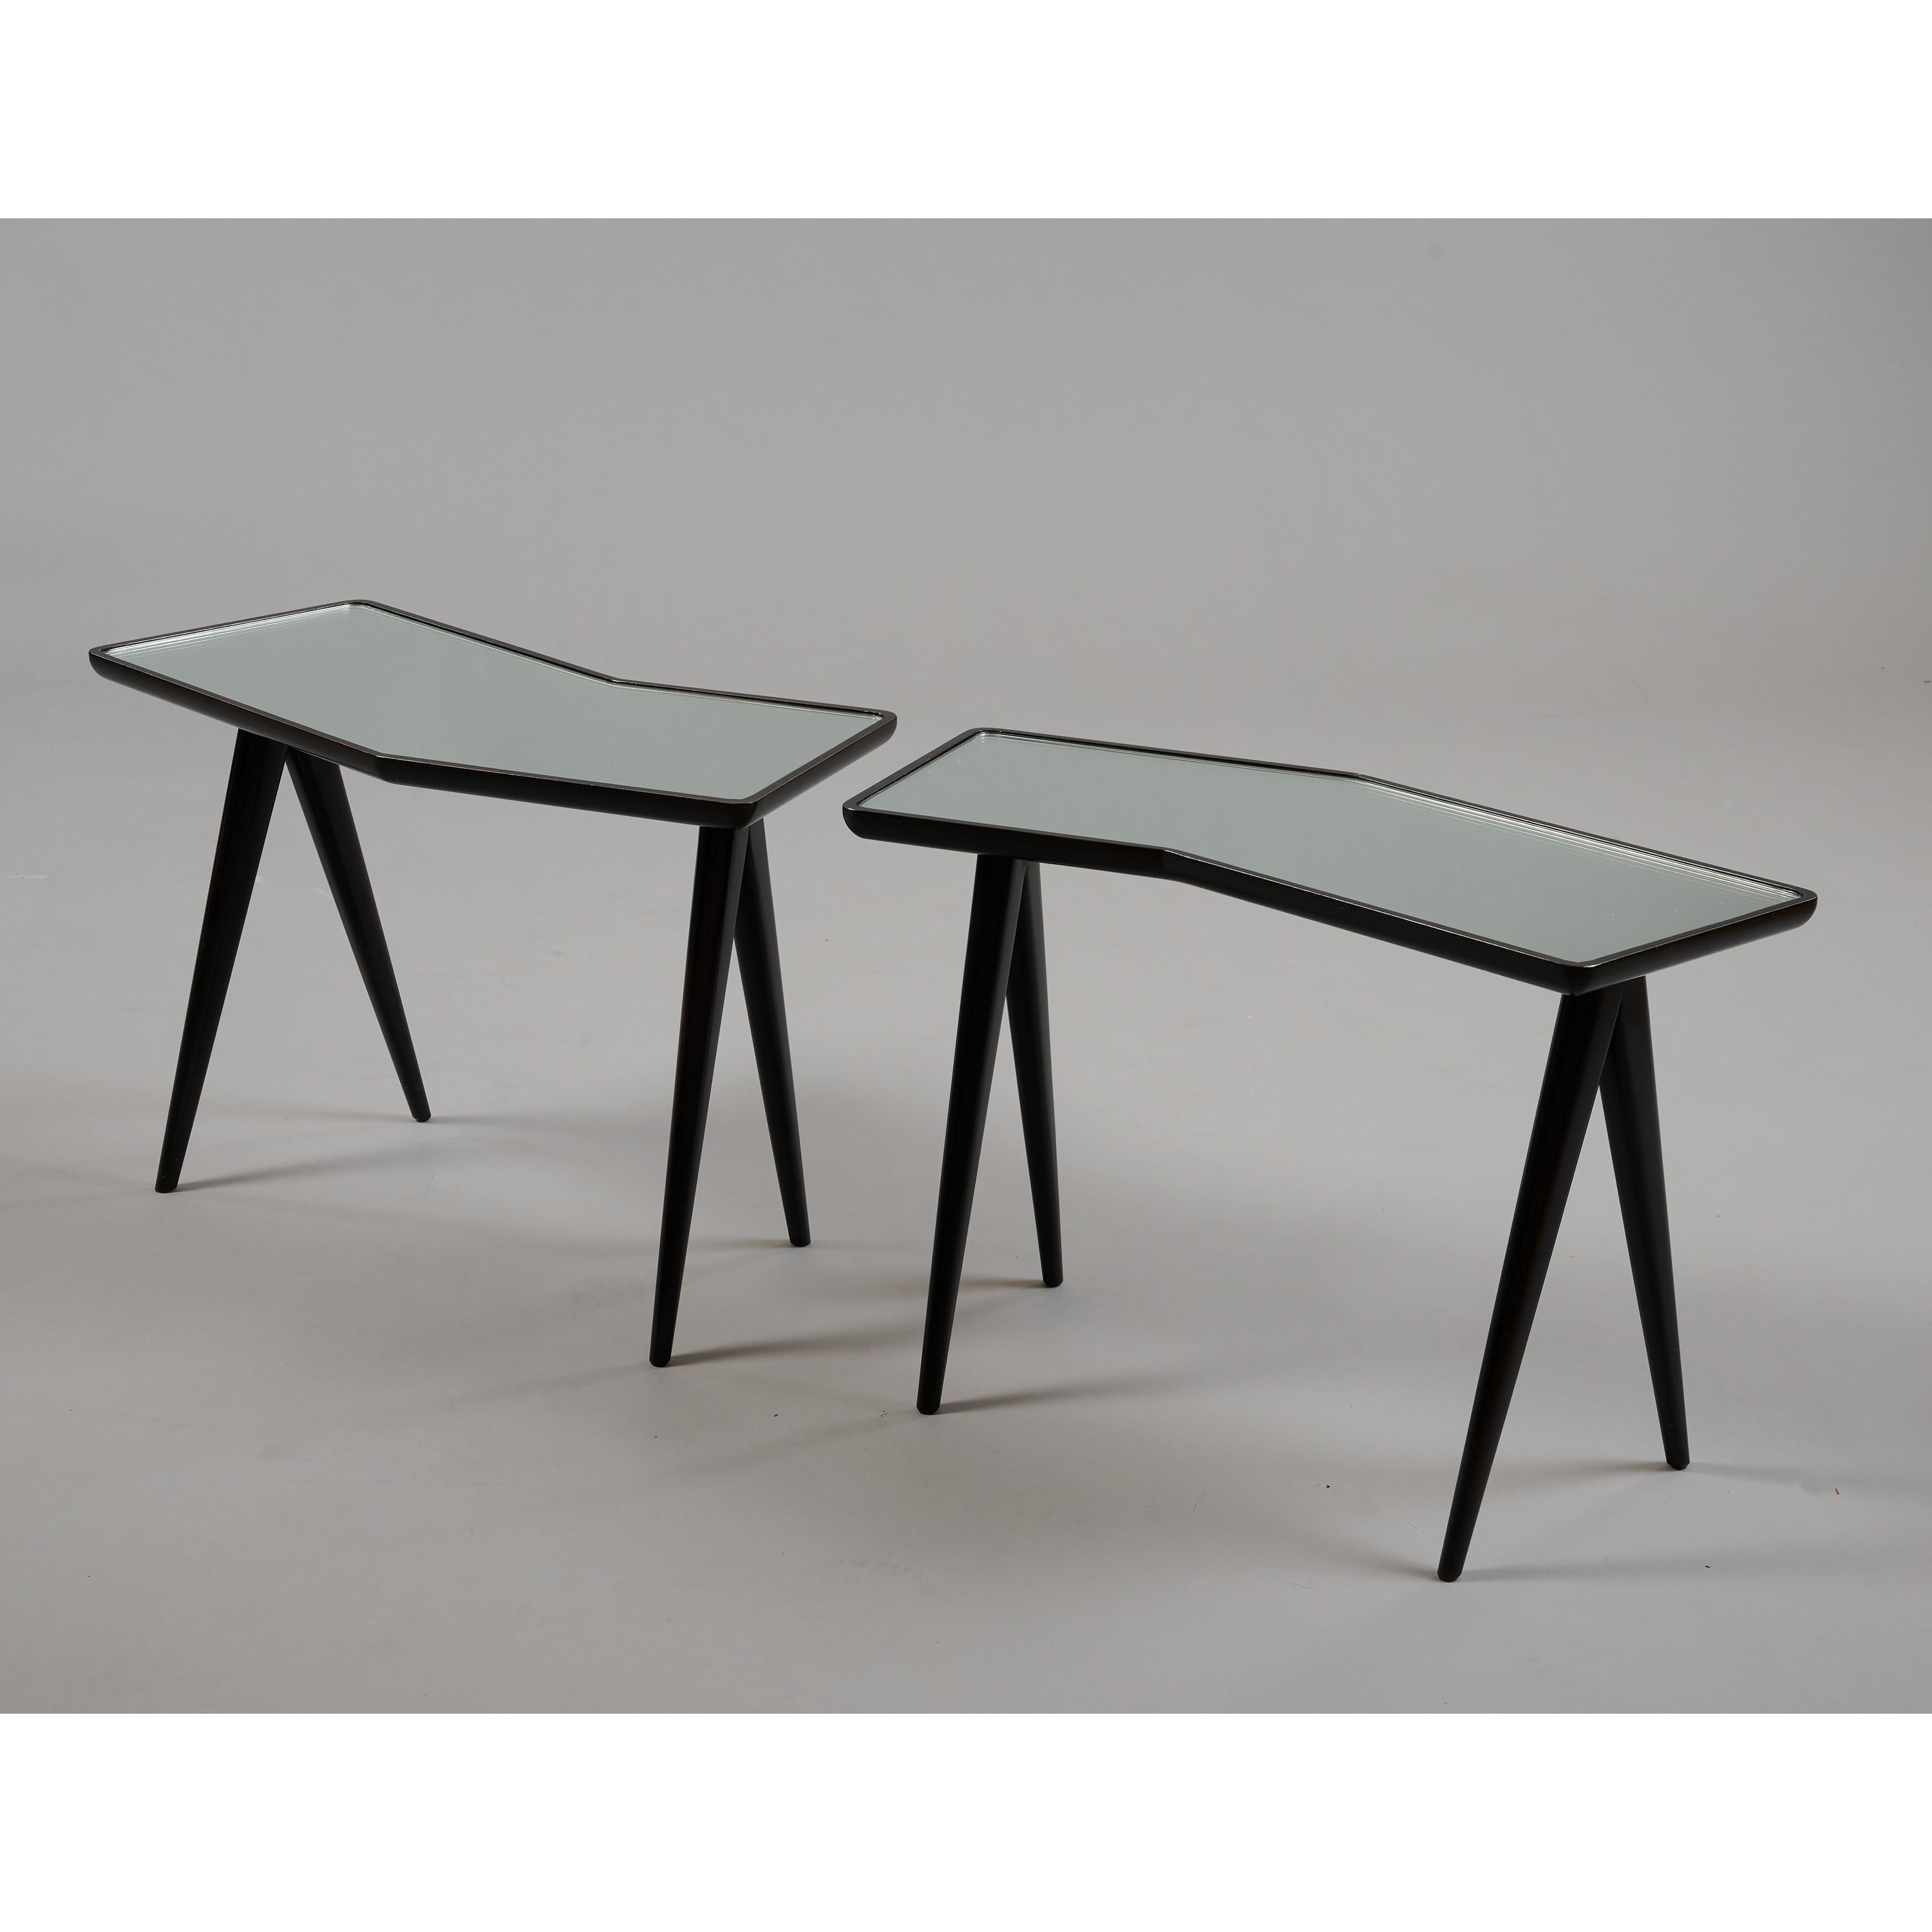 Gio Ponti Pair of Geometric Nesting Tables with Mirrored Tops, Italy, 1950's For Sale 2